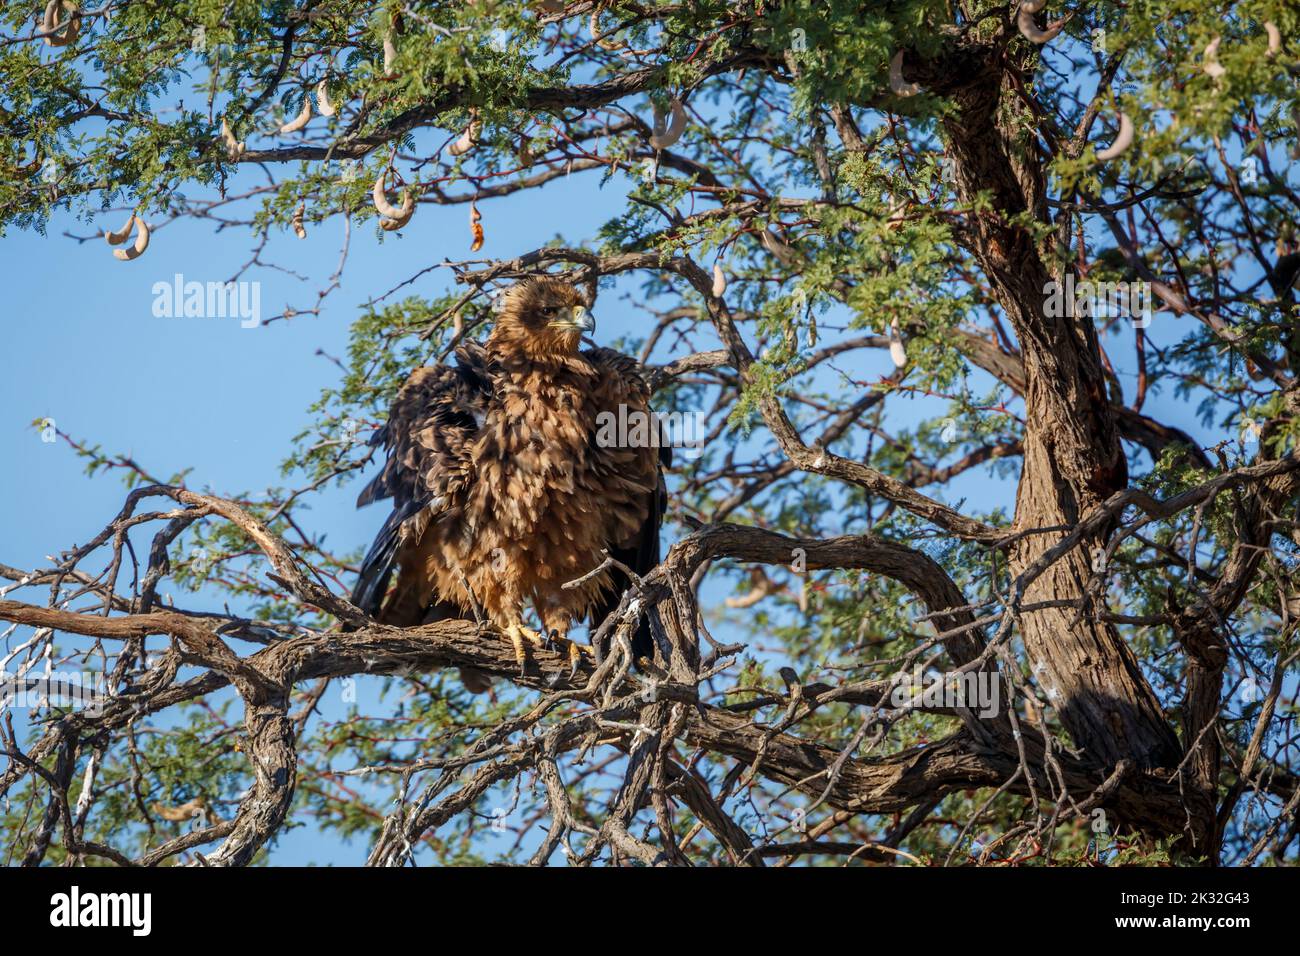 Tawny Eagle shaking in a tree in Kgalagadi transfrontier park, South Africa ; Specie Aquila rapax family of Accipitridae Stock Photo